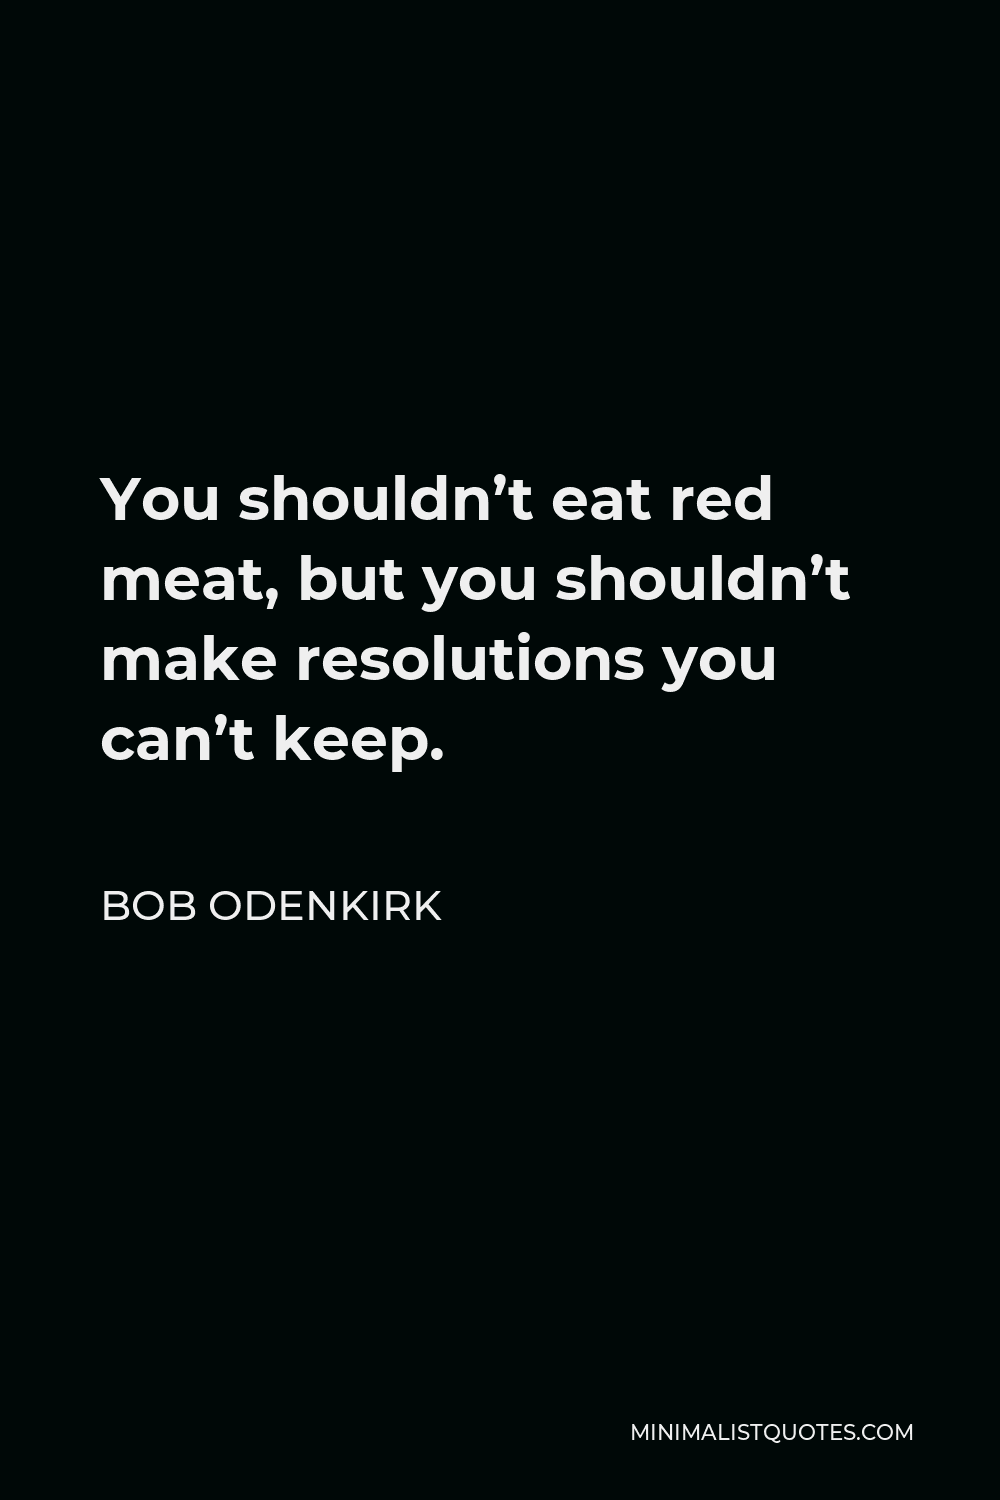 Bob Odenkirk Quote - You shouldn’t eat red meat, but you shouldn’t make resolutions you can’t keep.